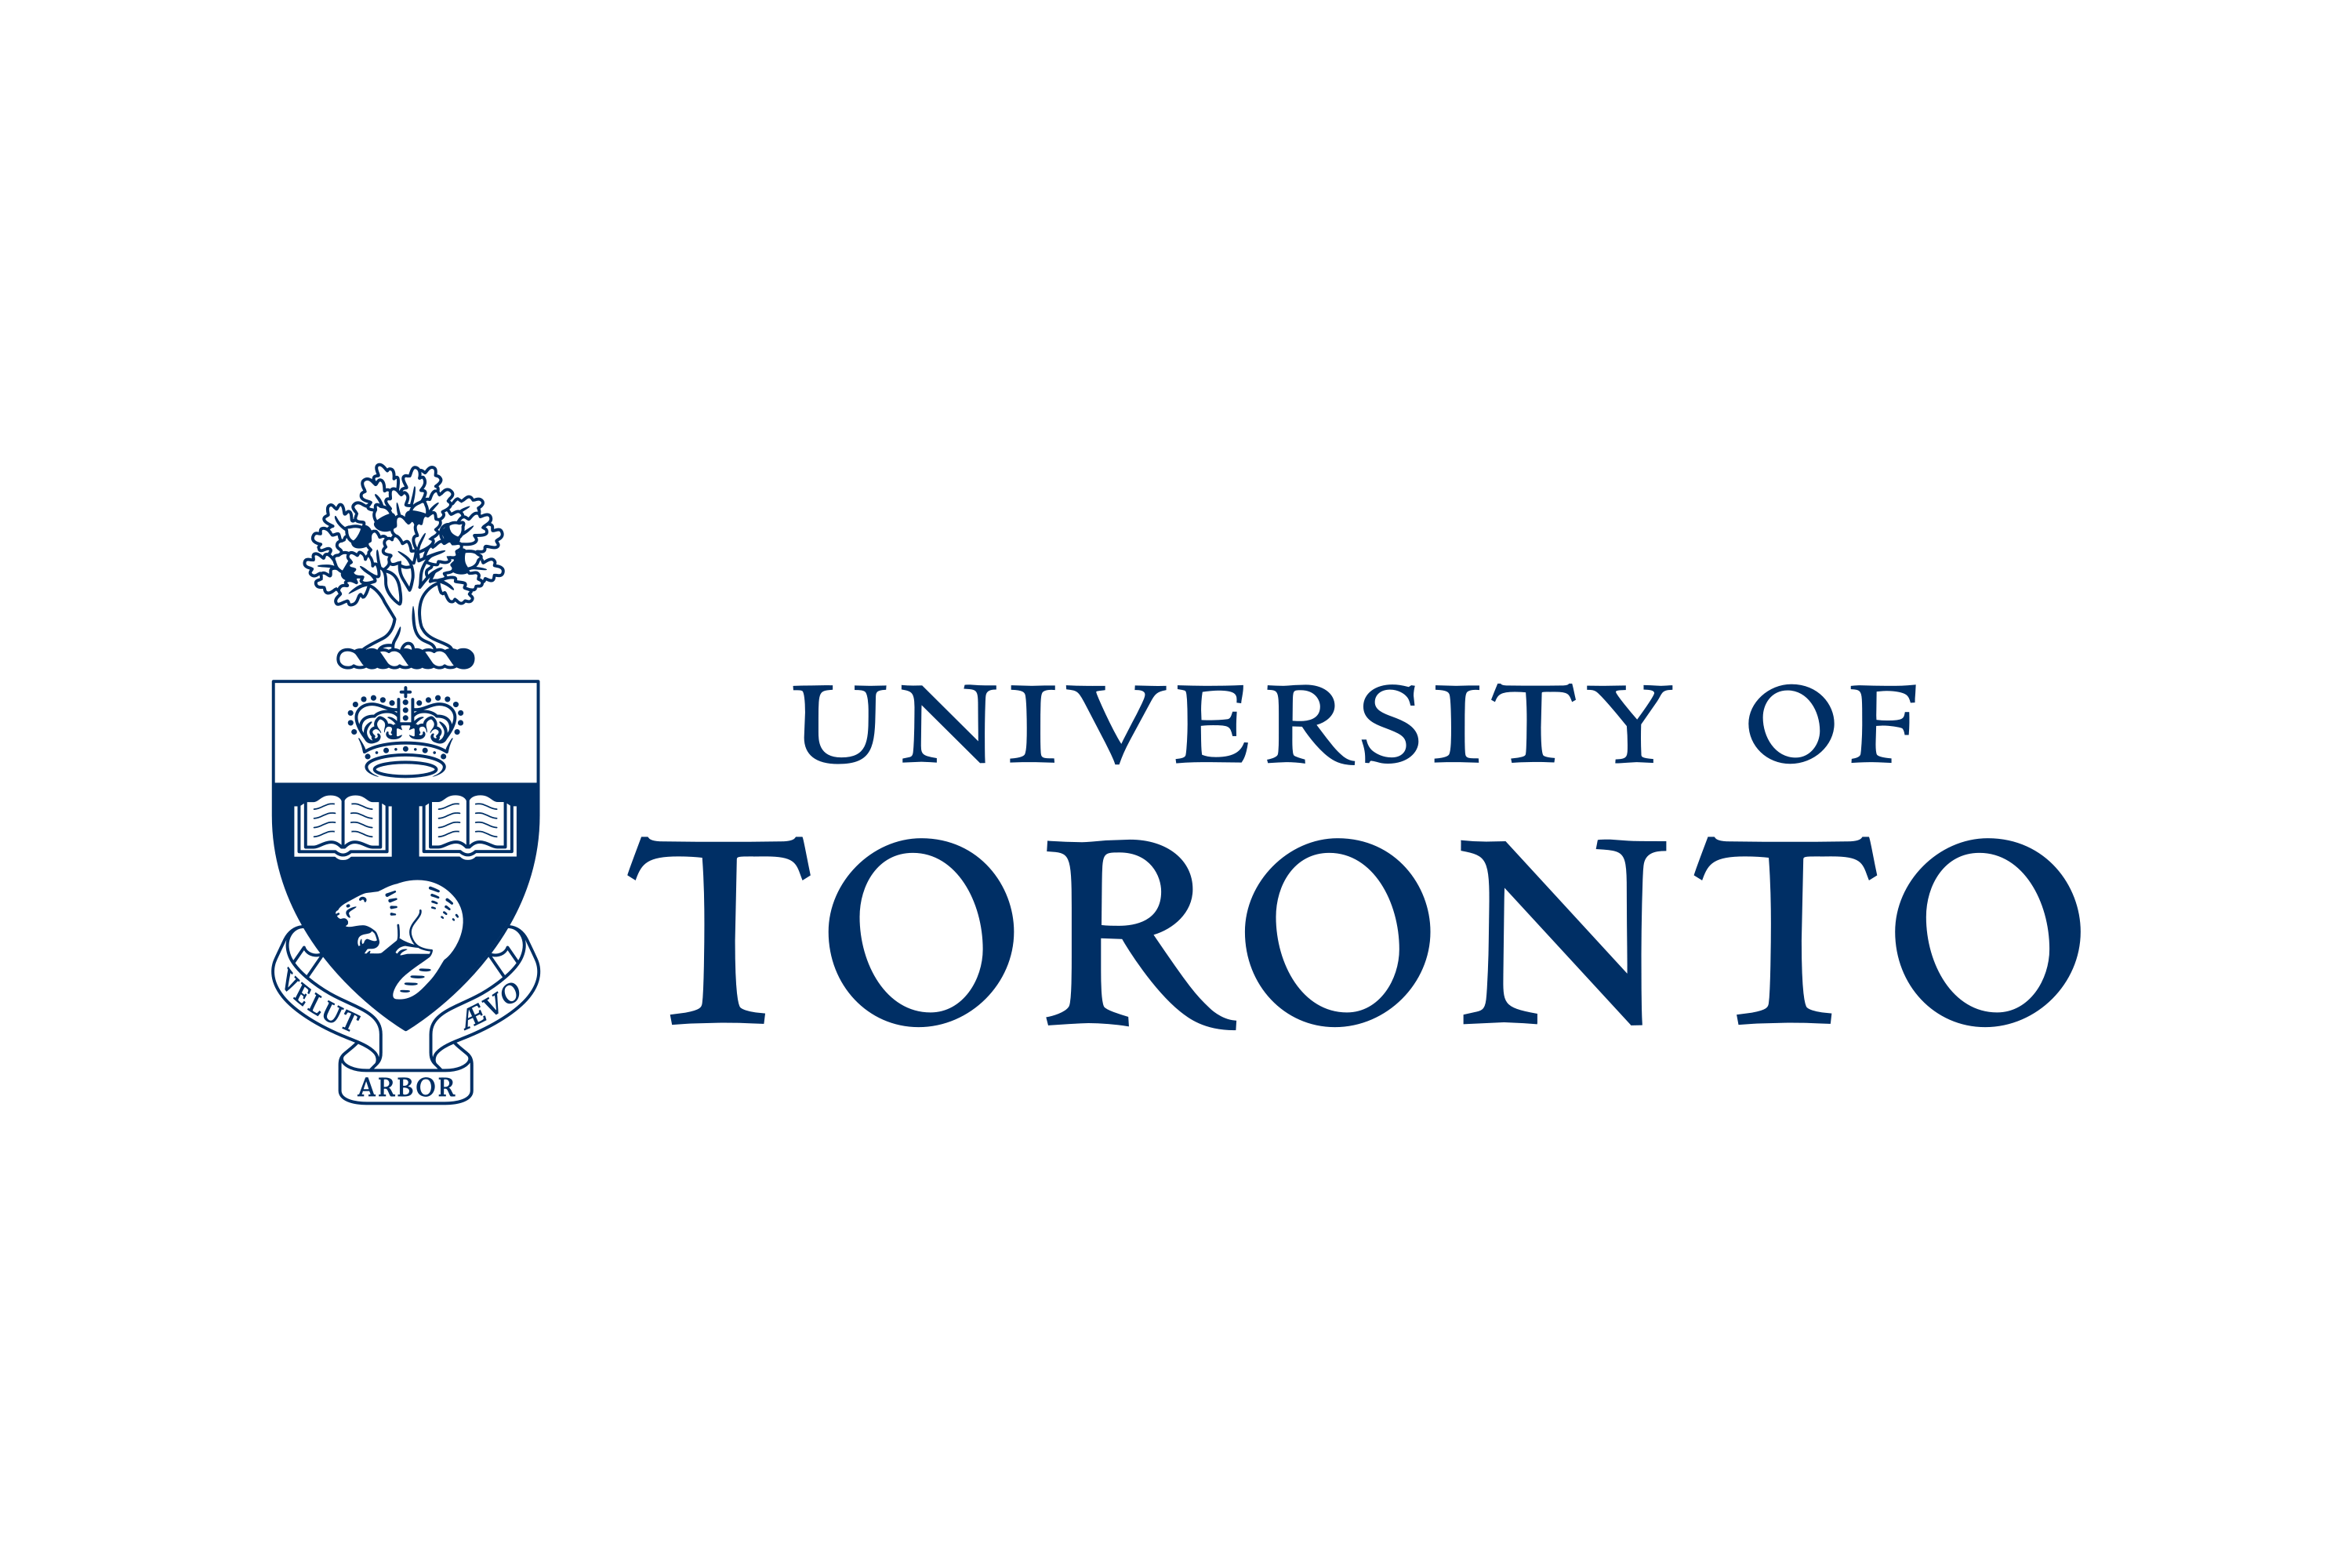 University of Toronto logo depicting a blue and white coat of arms.